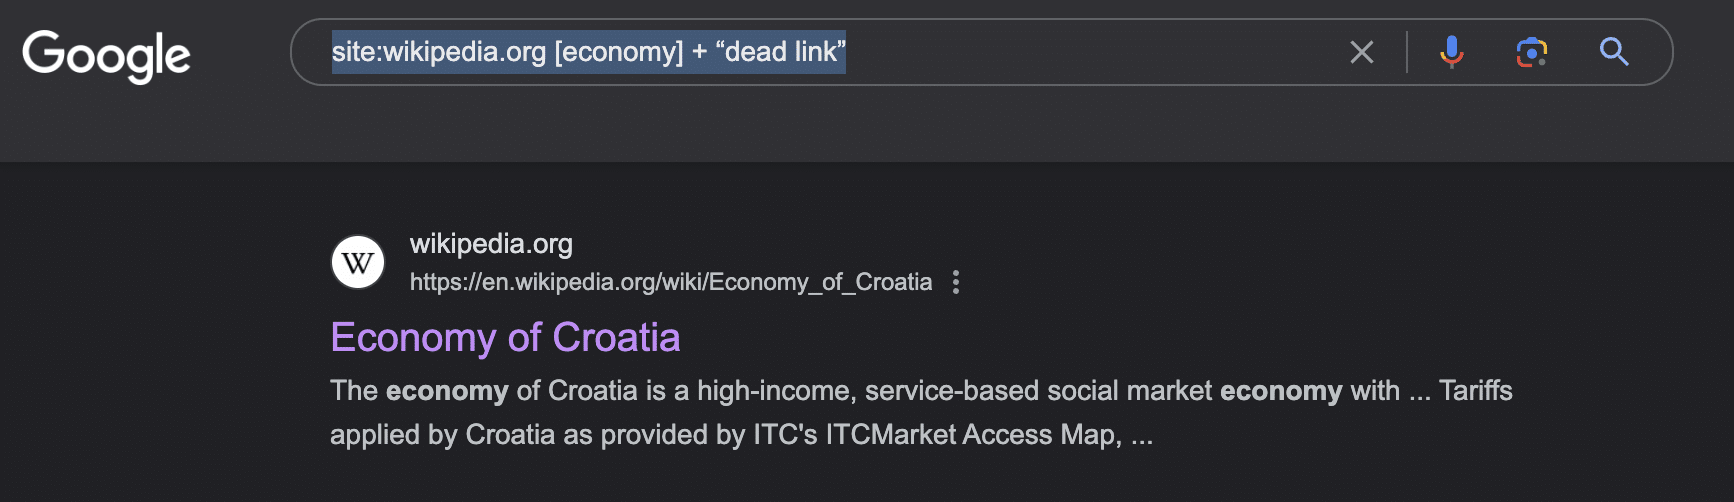 Using a search operator to find dead links on Wikipedia.